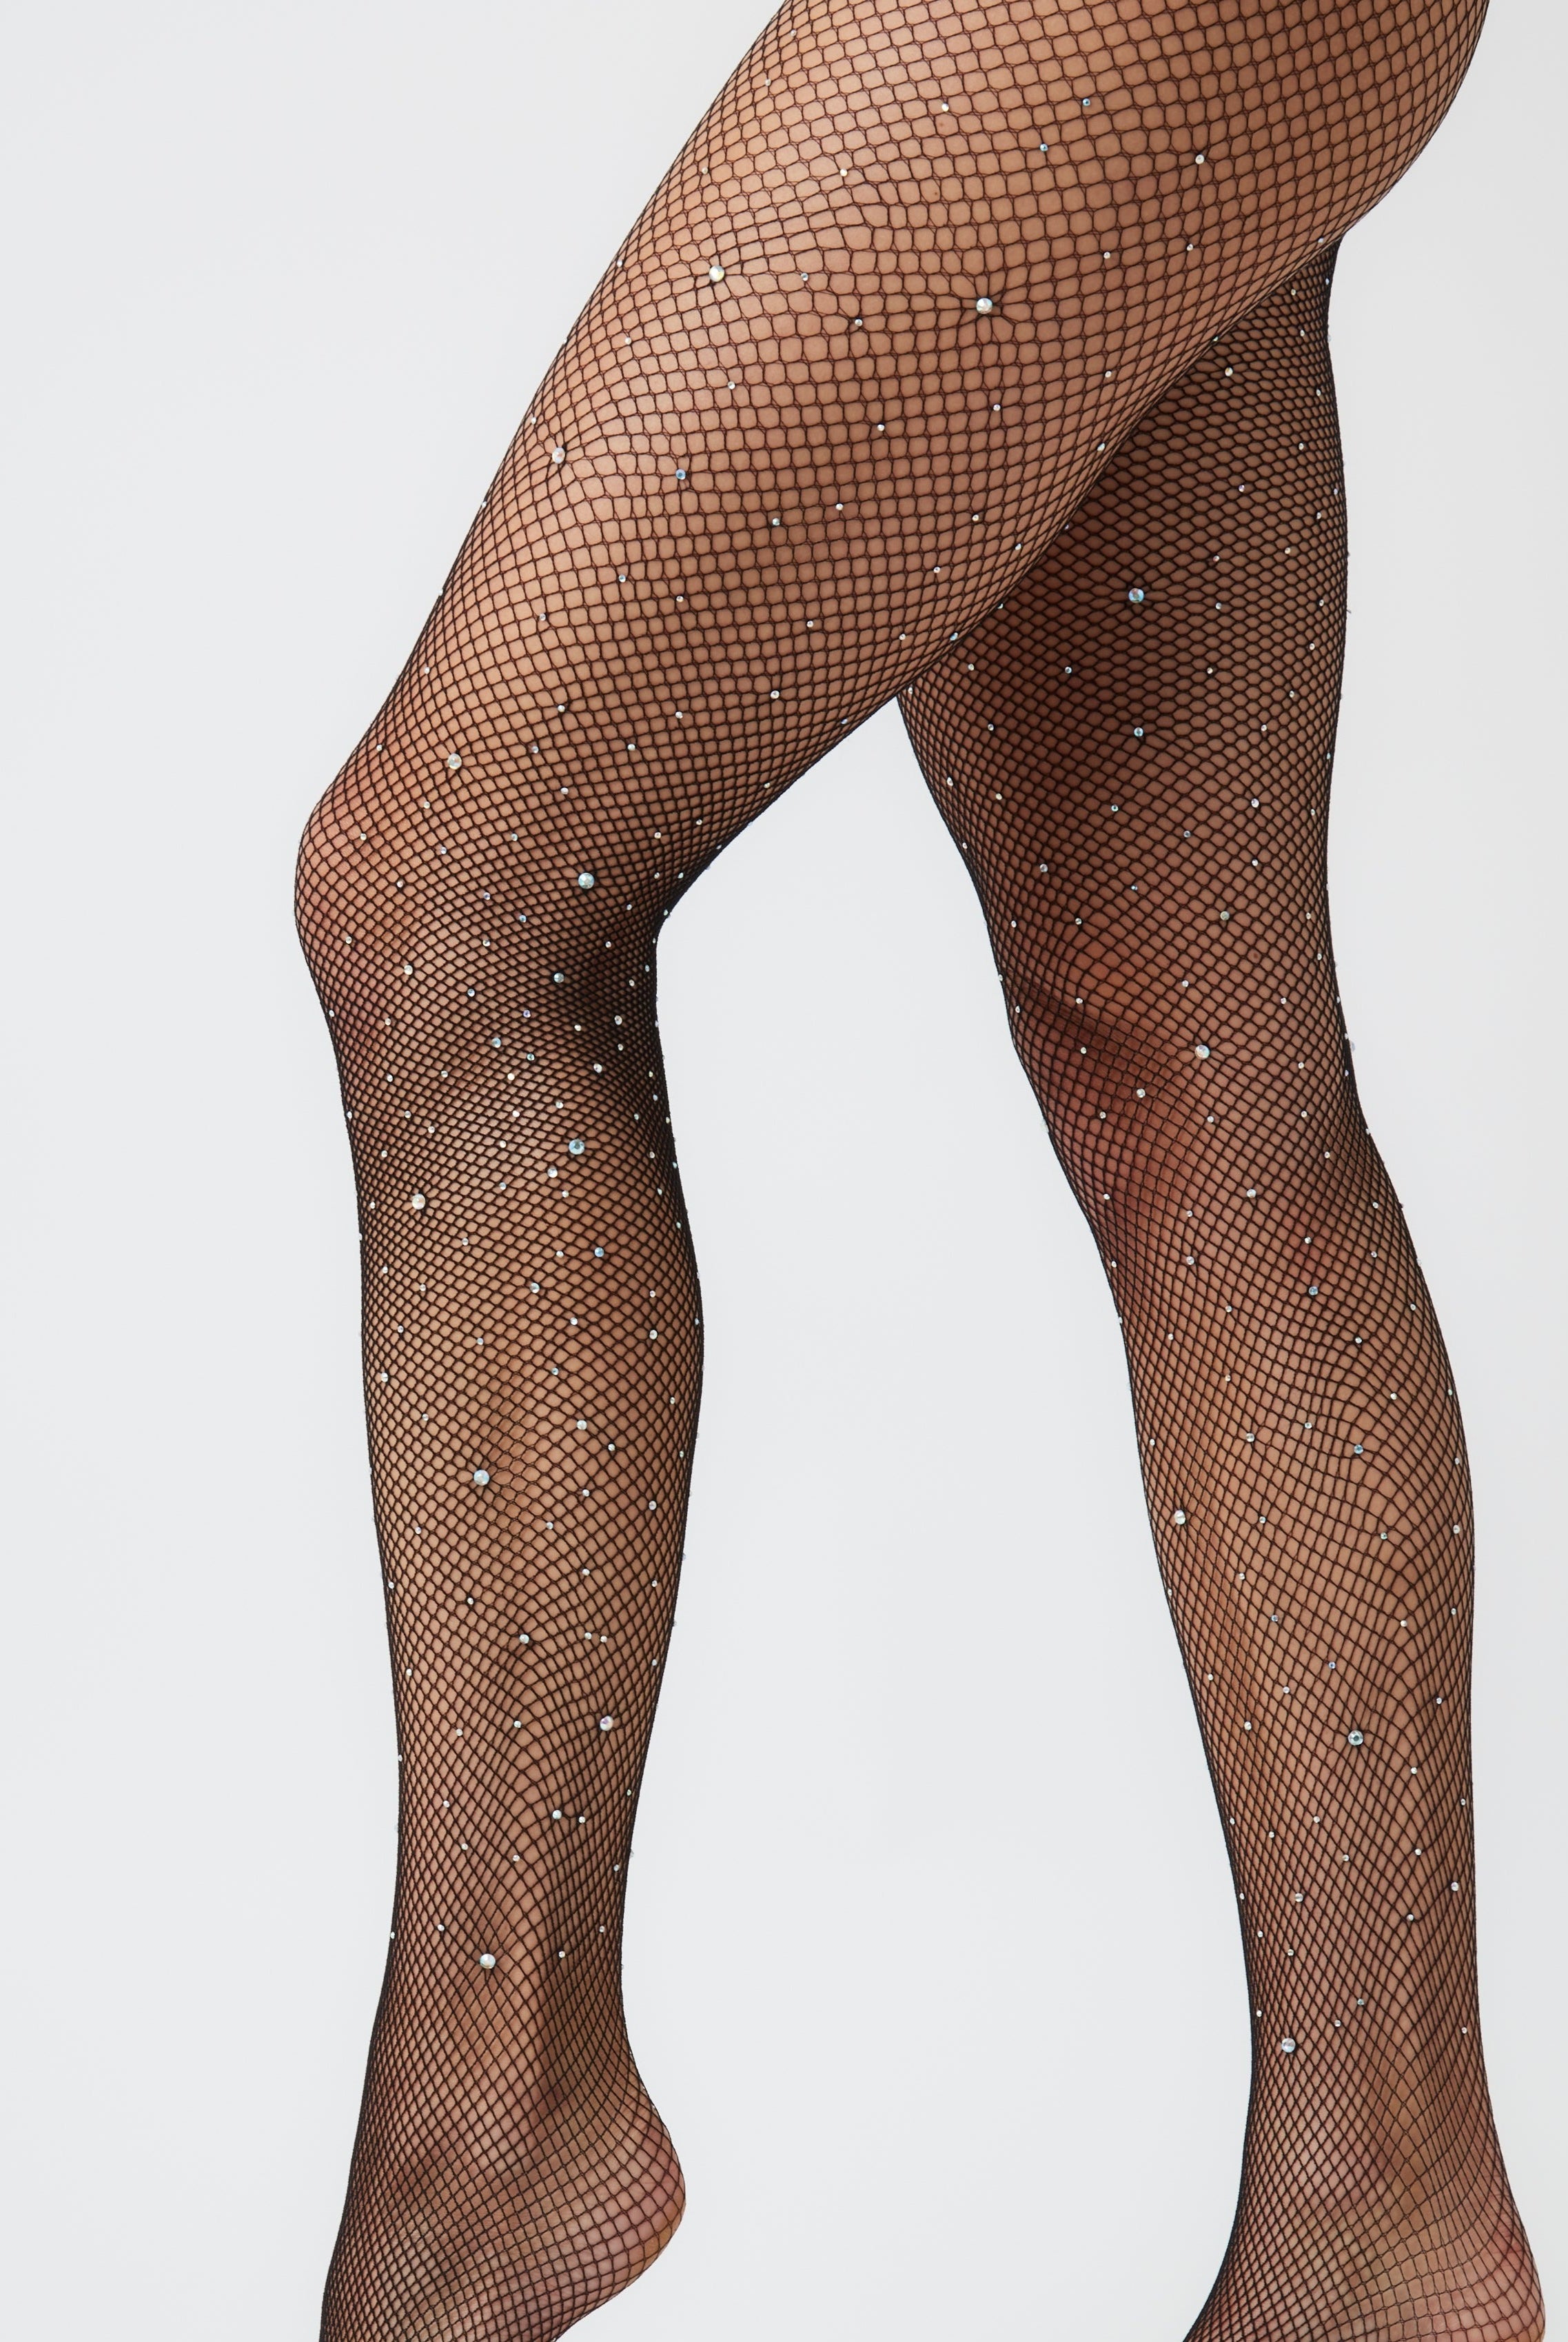 Crystal diamante rhinestone black fishnet tights | party tights | women's tights | My accessories London tights hosiery stockings | Christmas | New Years | Halloween | Party | Occasion | Glam | Dinner | Dress up | Cocktails | Going Out Outfit